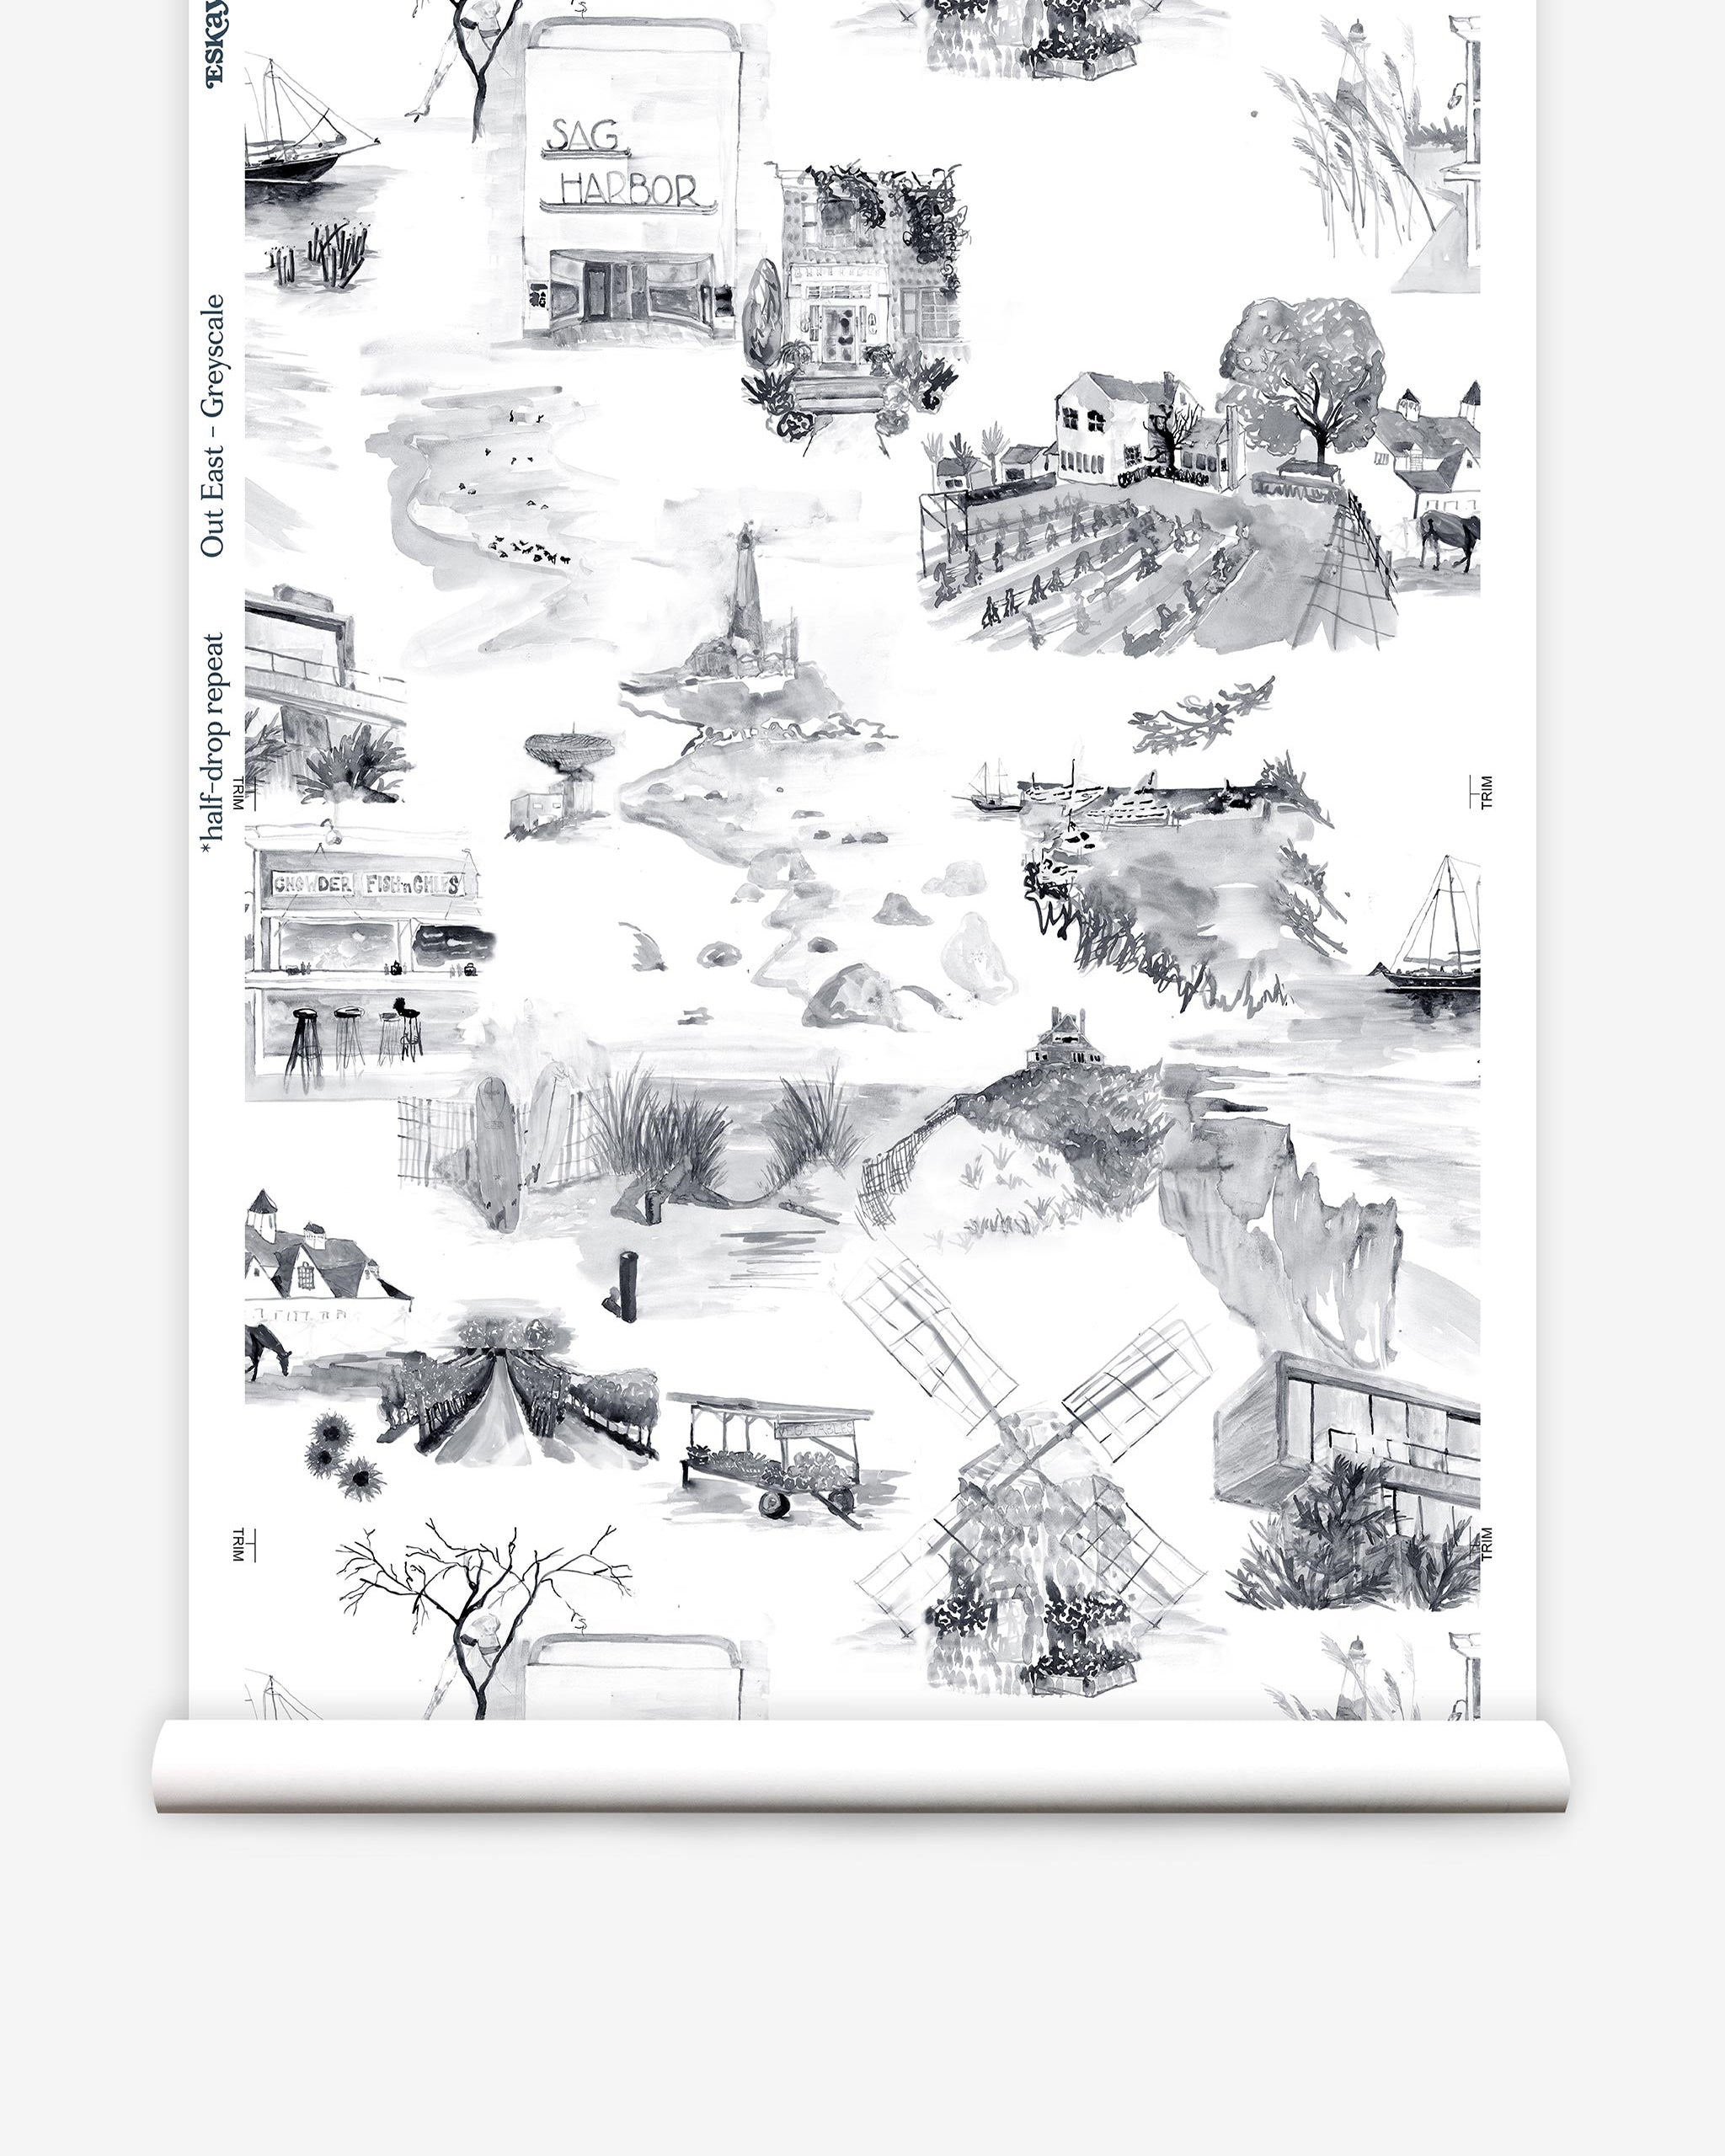 Partially unrolled wallpaper yardage in a playful illustrated city print in gray, black and white.